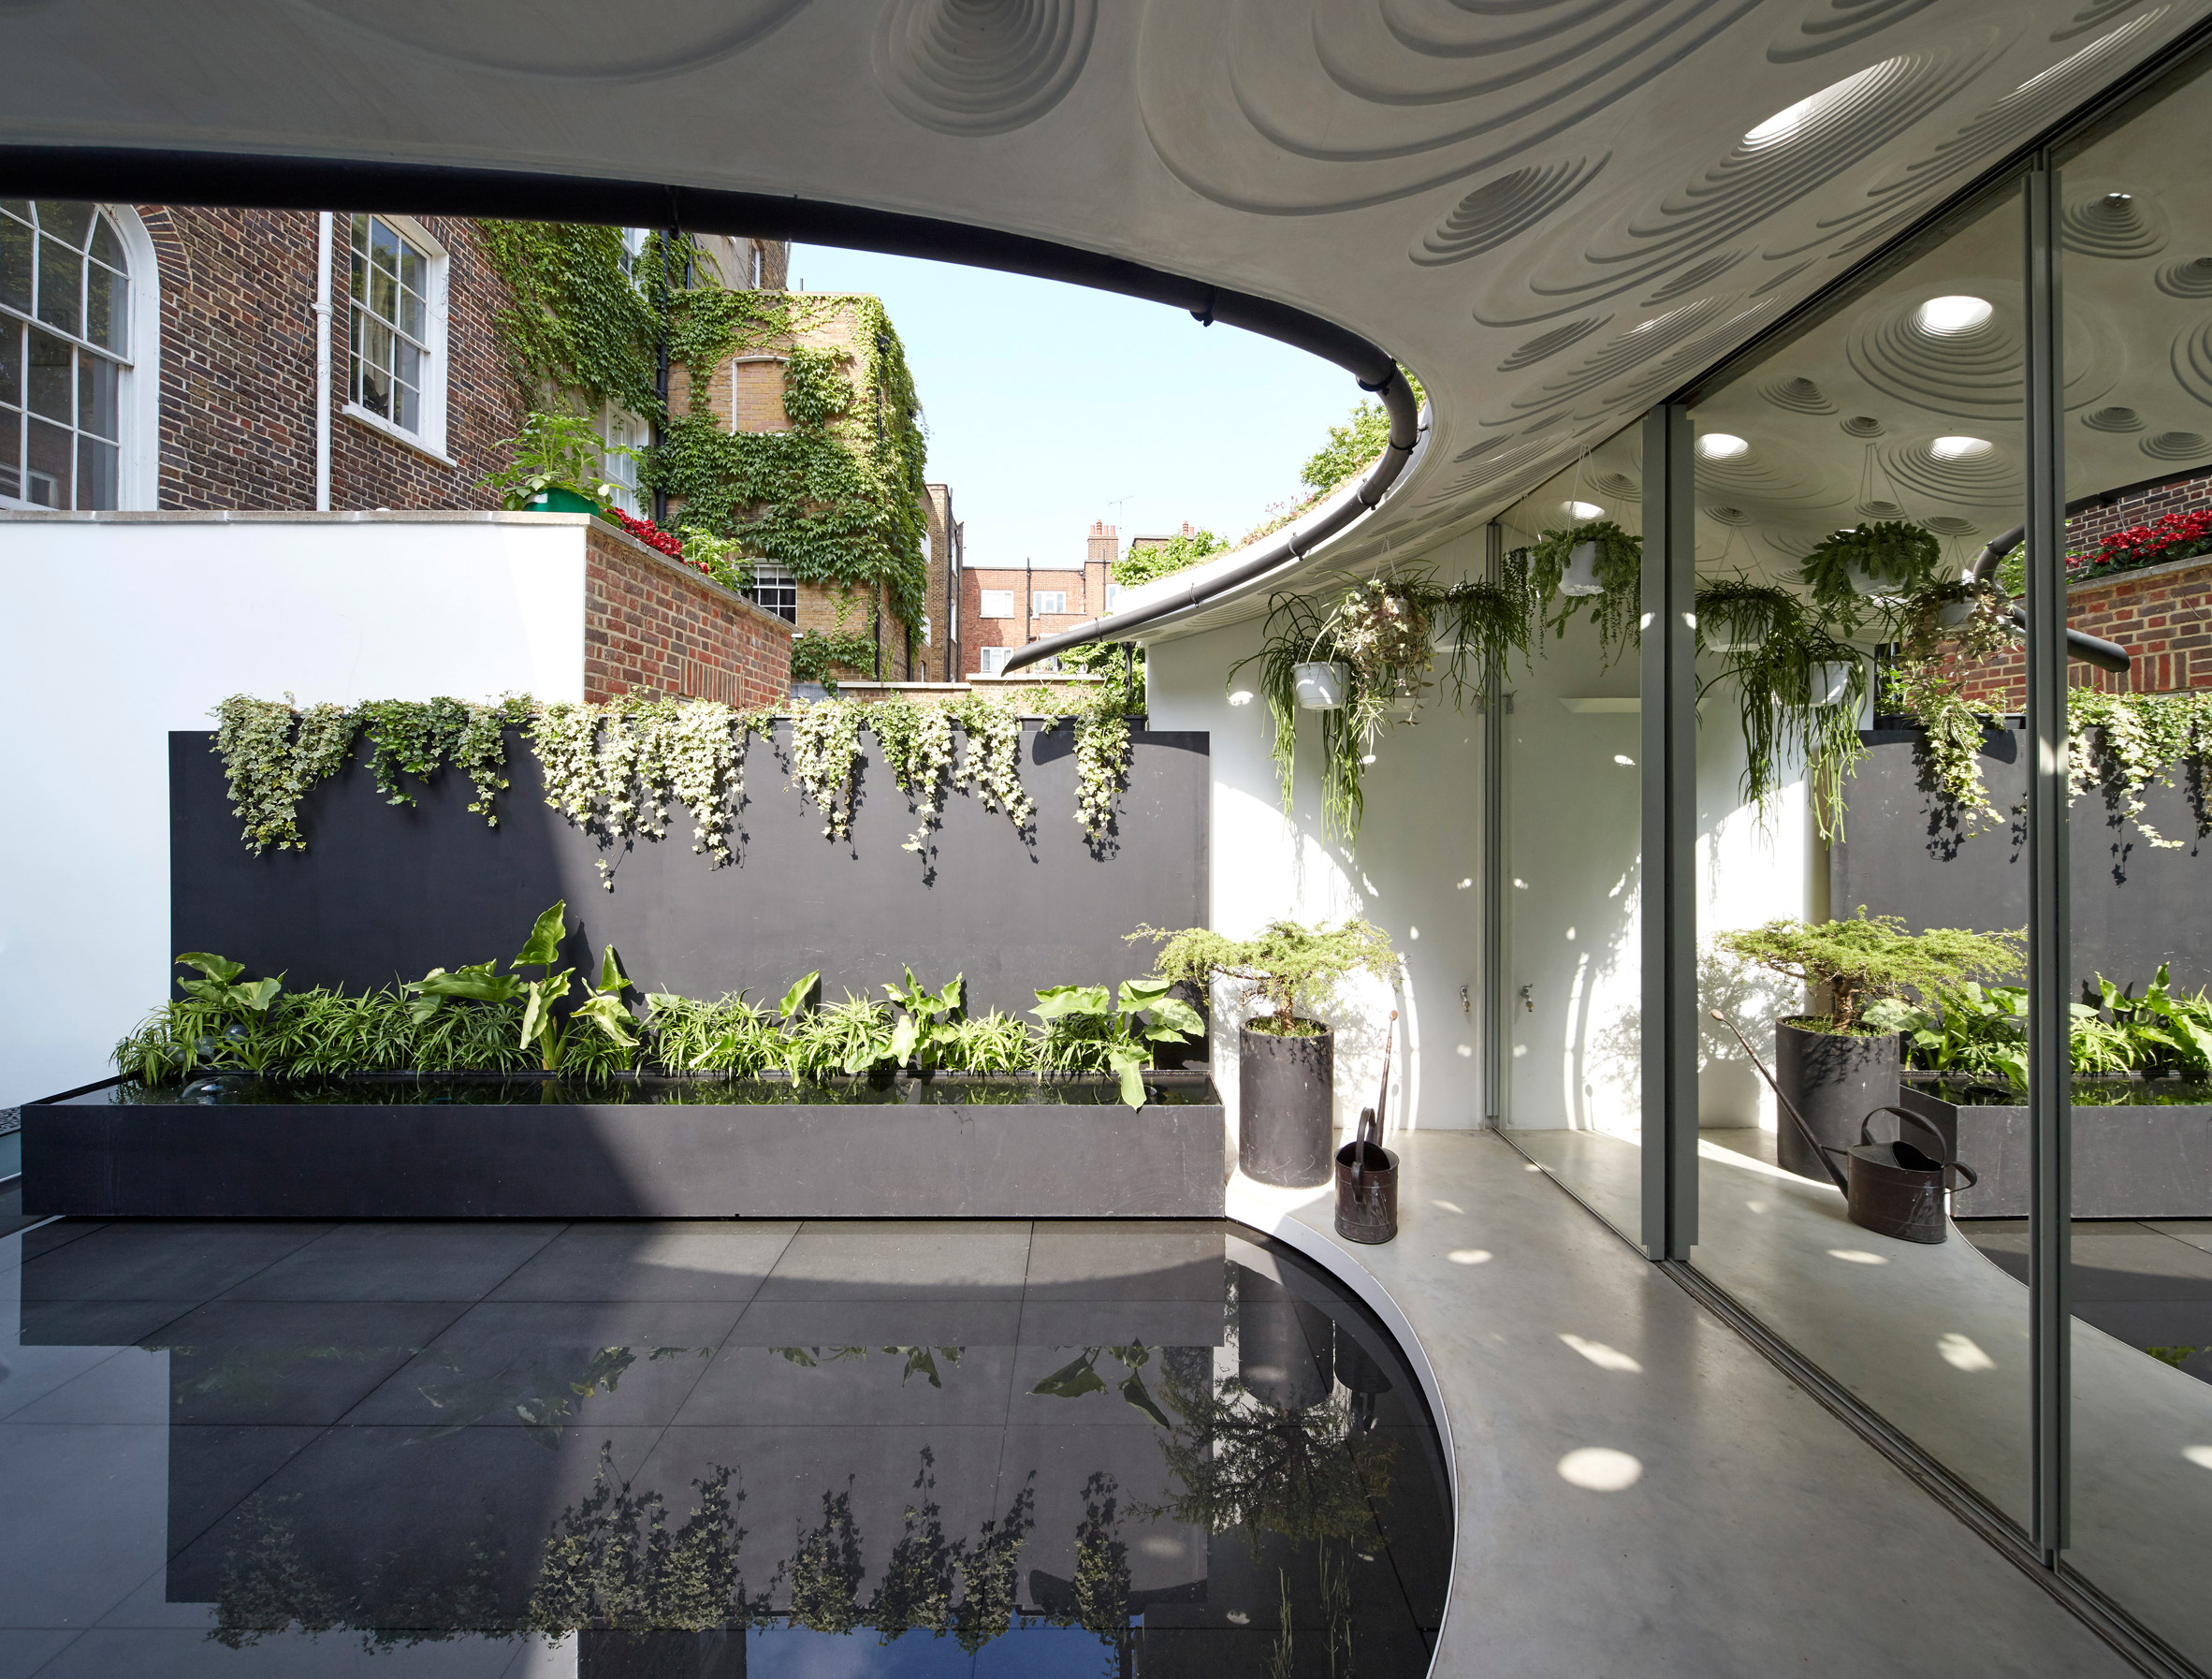 Sun Rain Rooms named London's best new house extension in Don't Move, Improve! 2018